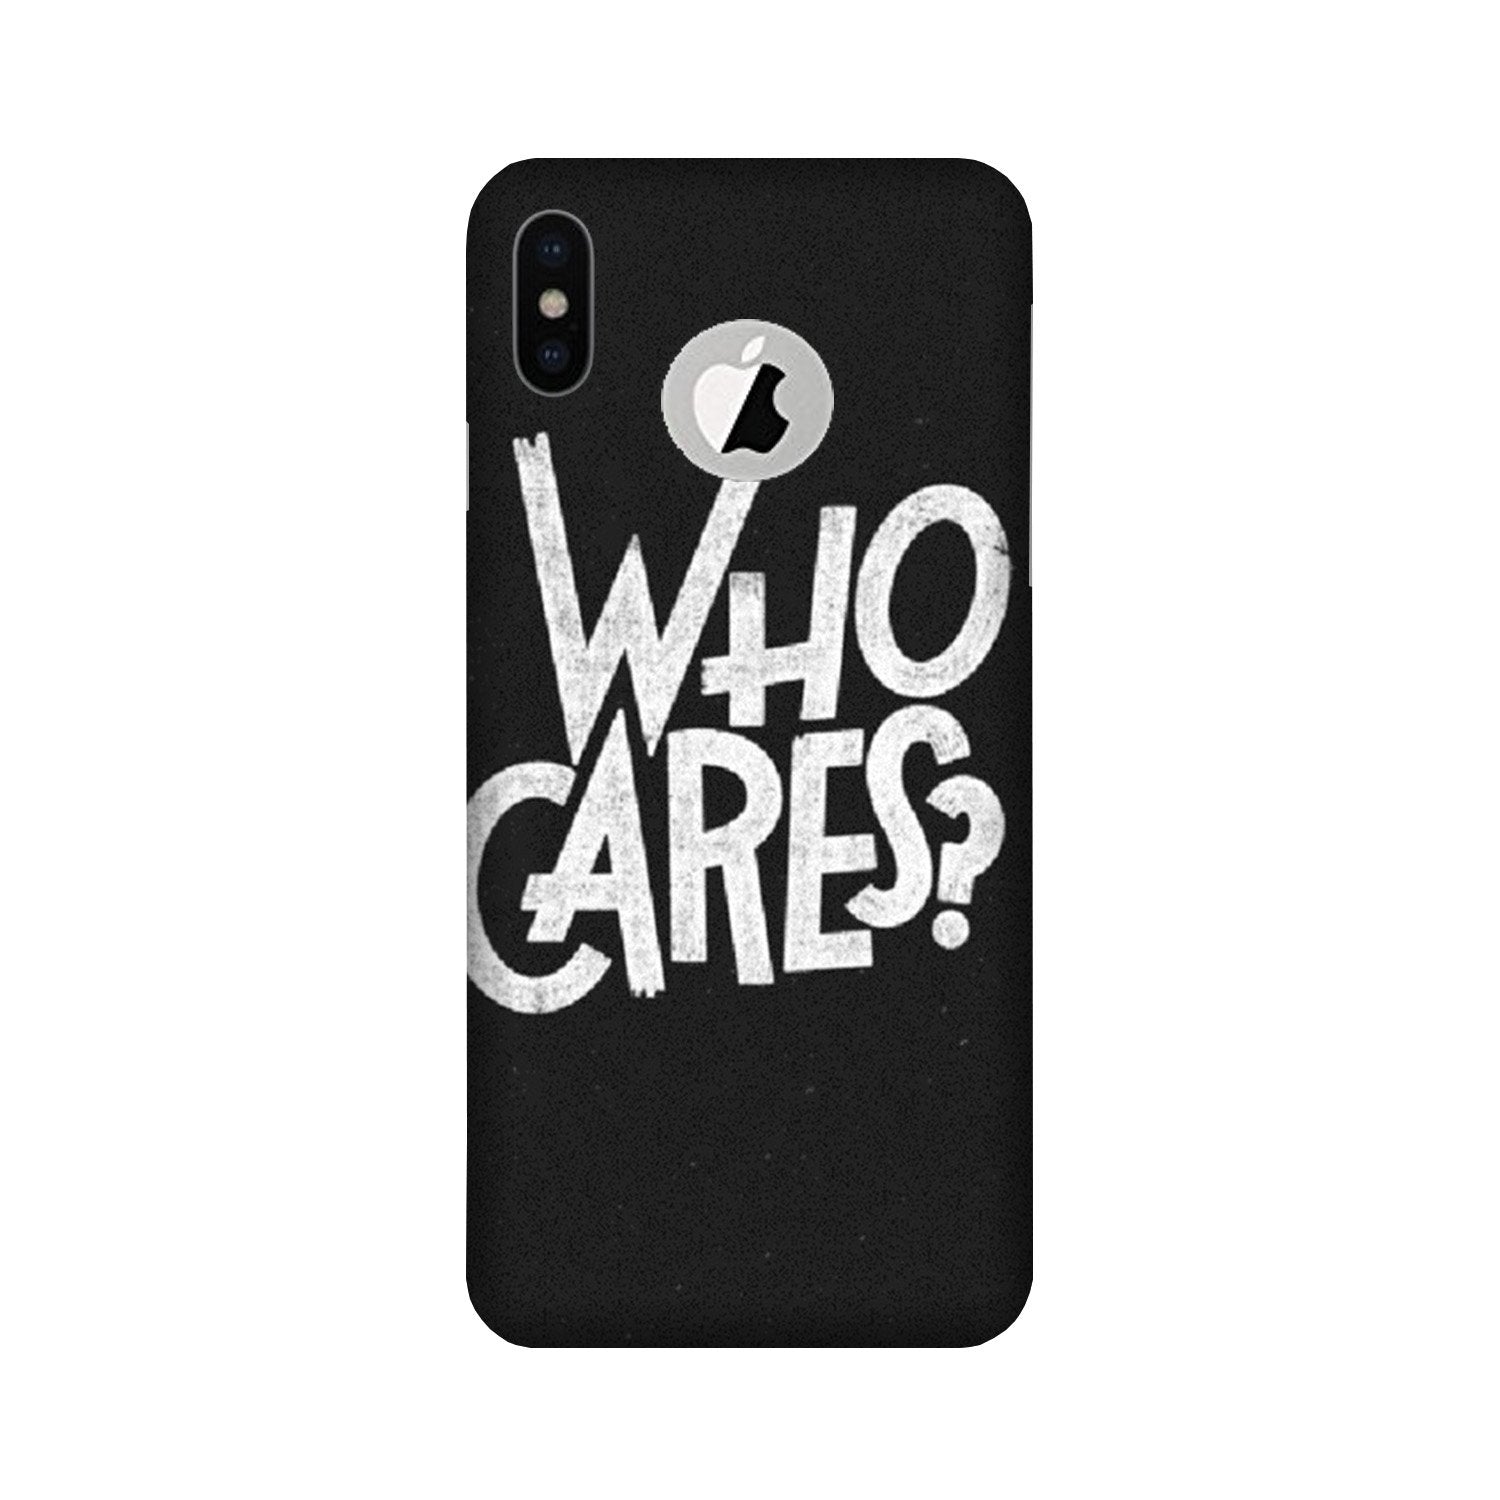 Who Cares Case for iPhone X logo cut